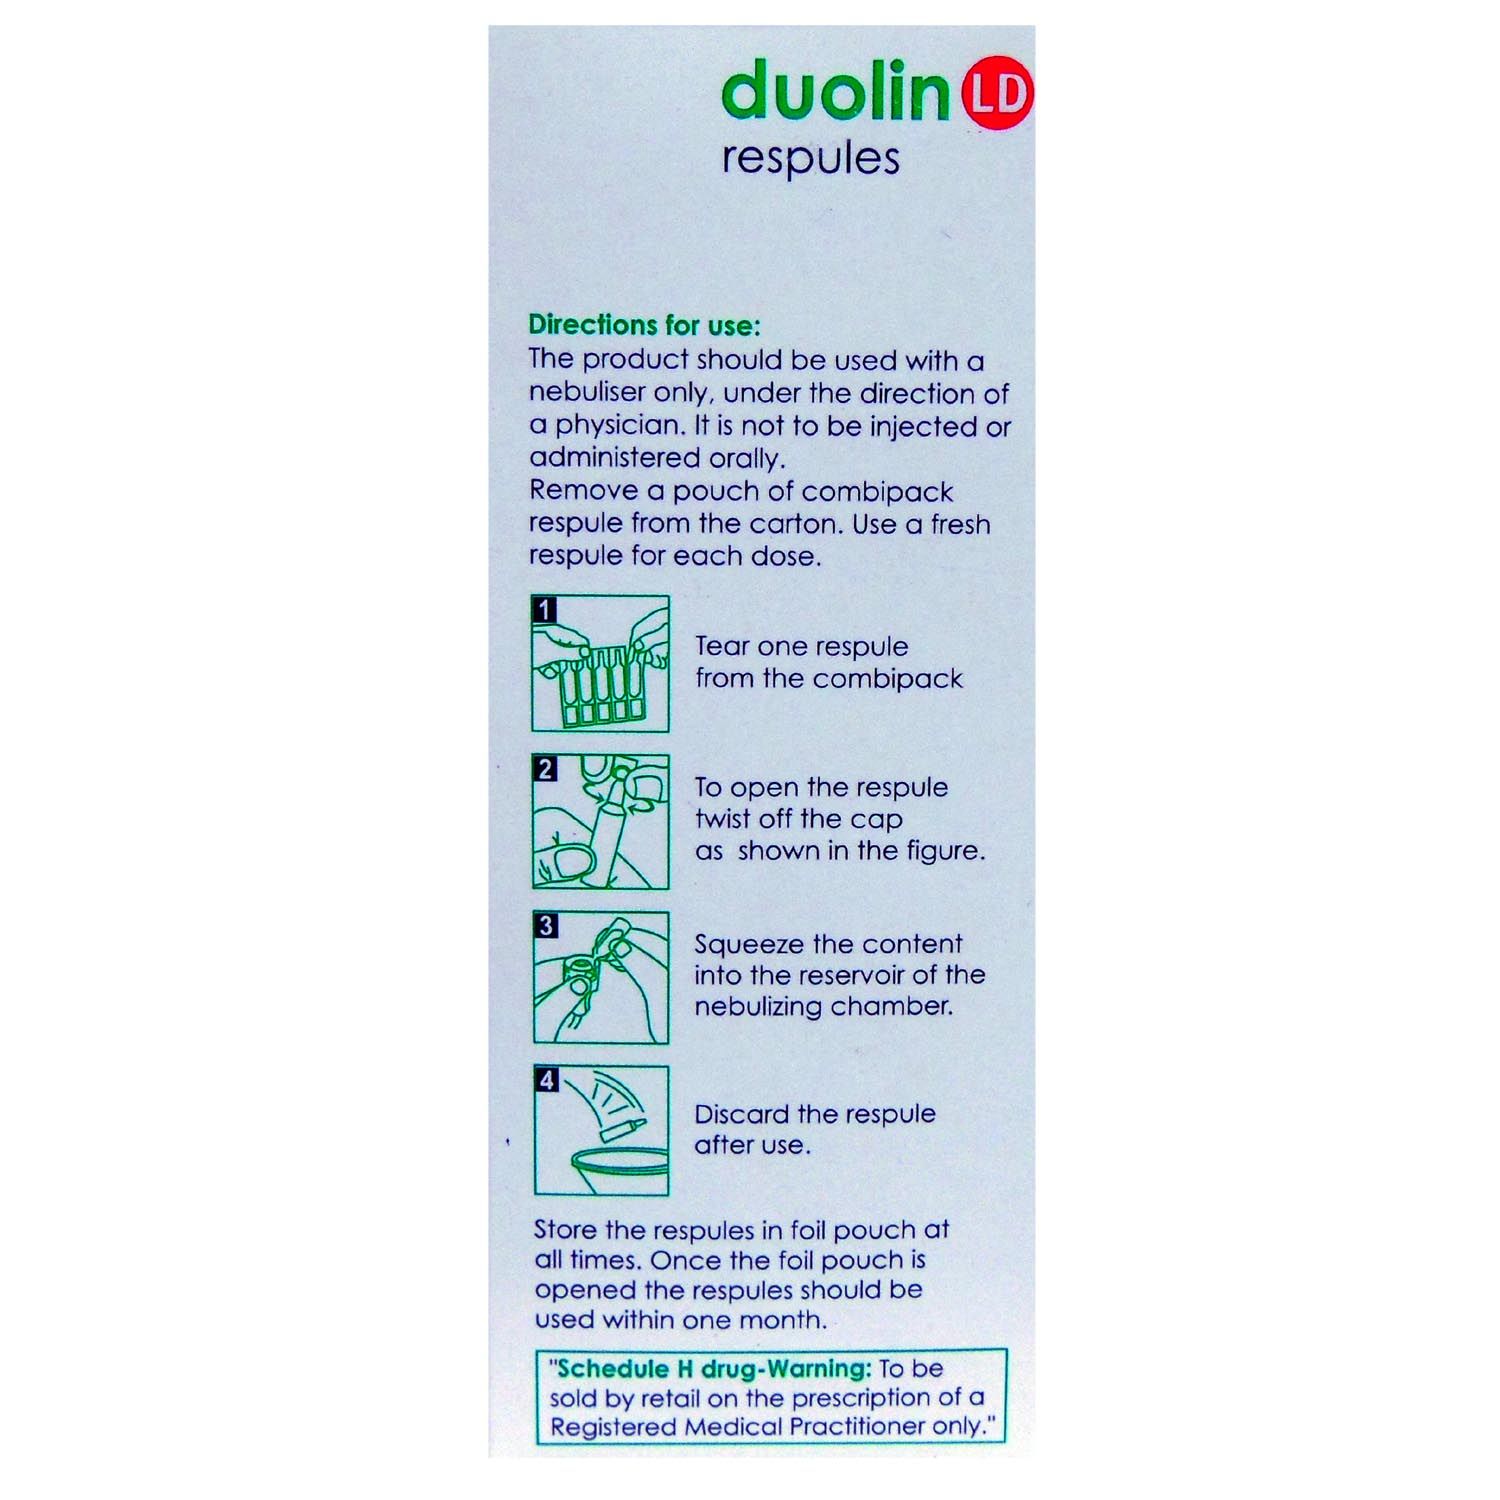 Duolin LD Respules 5X2.5 ml Price, Uses, Side Effects, Composition Apollo  Pharmacy